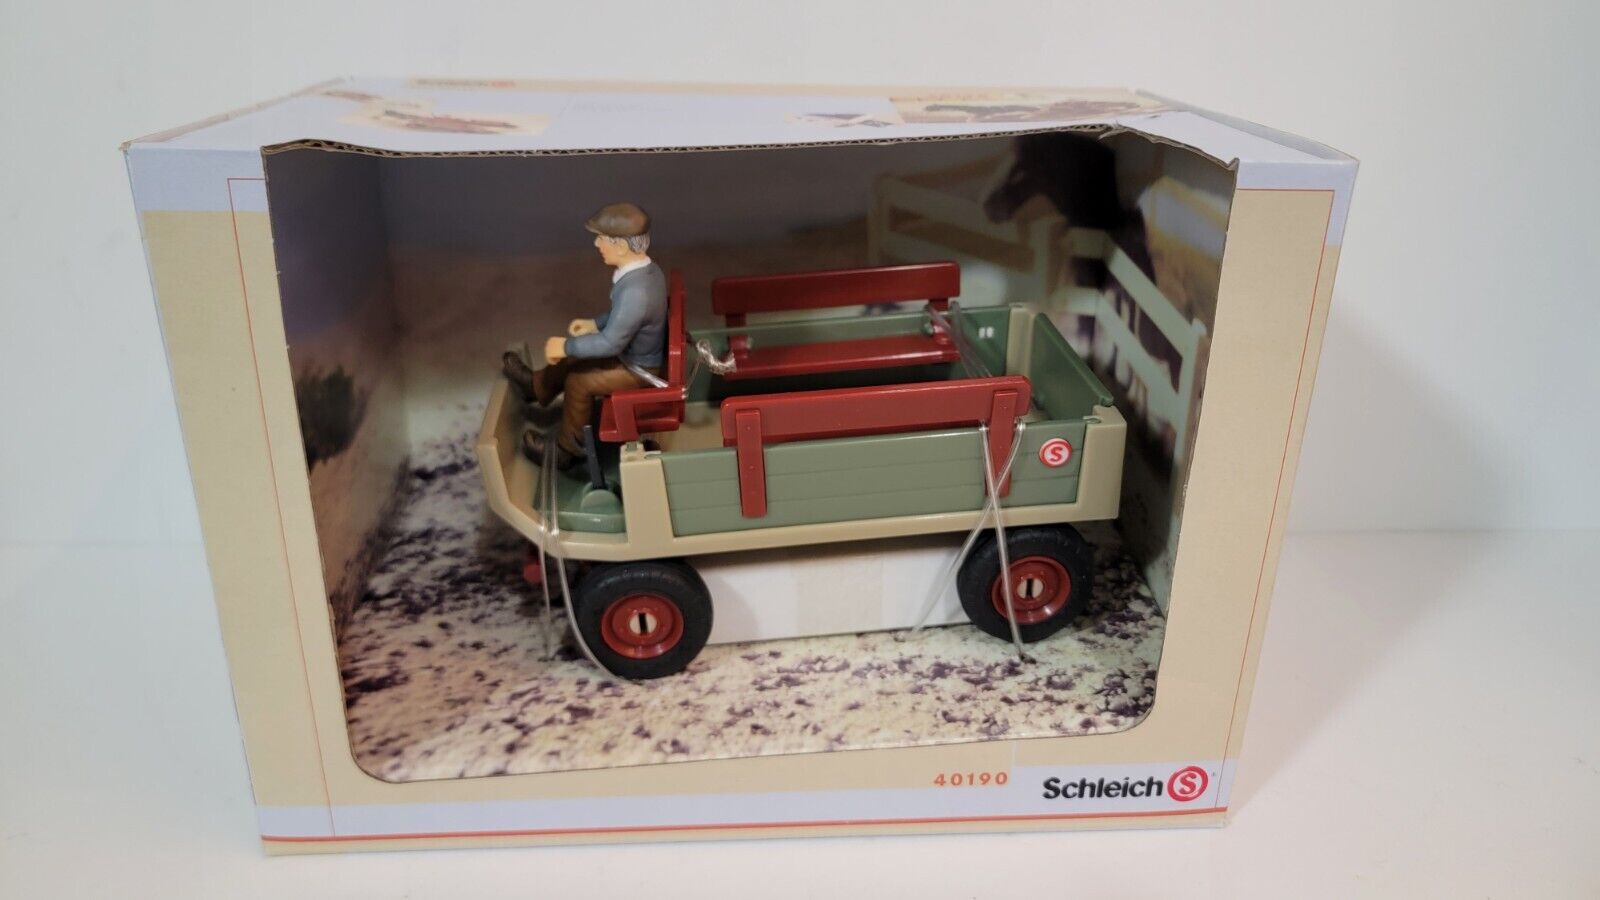 SCHLEICH 40190 CART with Driver Domestic Farm Figure Carriage Wagon RARE RETIRED